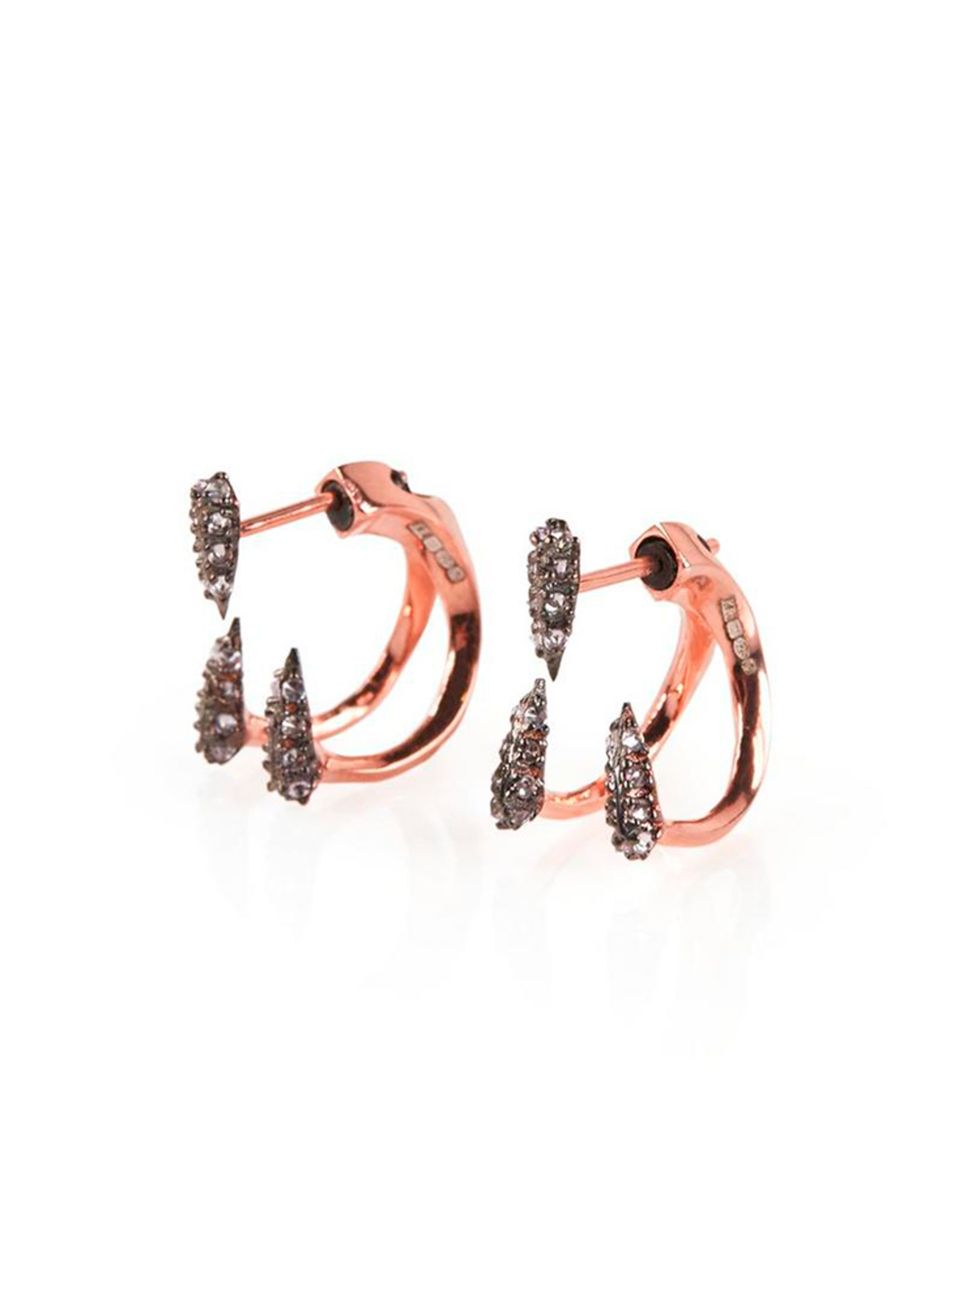 <p>Katie Rowland at <a href="http://www.veryexclusive.co.uk/katie-rowland-dark-moon-claw-earrings-rose-gold/1460937936.prd" target="_blank">Very Exclusive</a>, £185</p>